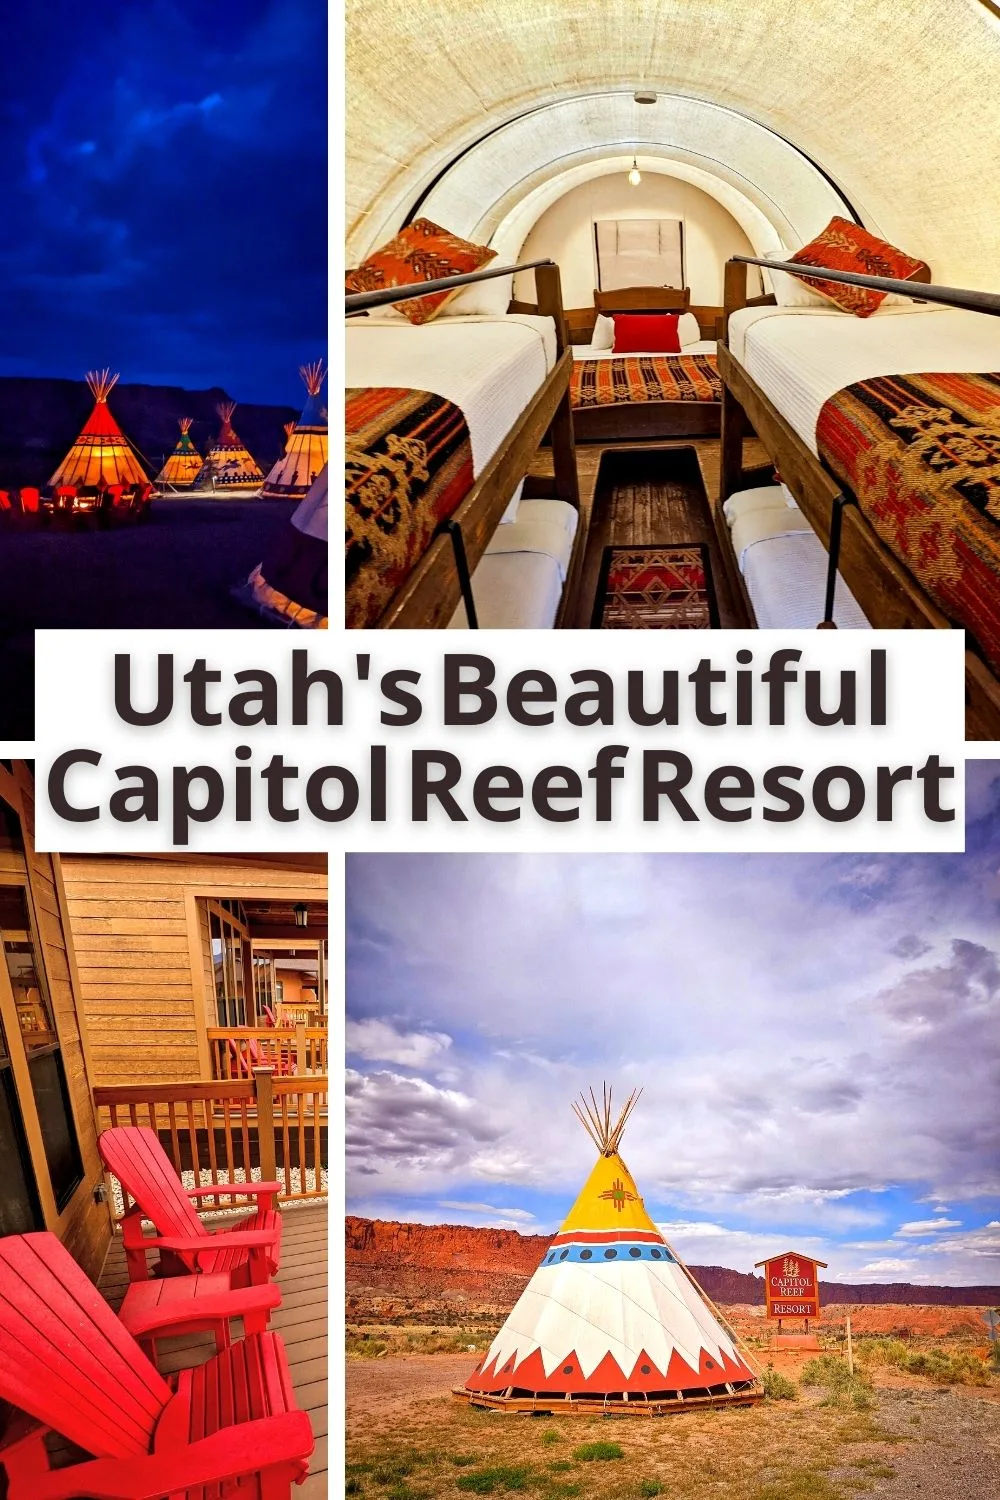 The Capitol Reef Resort at the edge of Capitol Reef National Park is one of the most unique properties we've seen. Located in the center of the state, this Utah glamping resort is fun with kids, or perfect for an adults-only National Park trip.